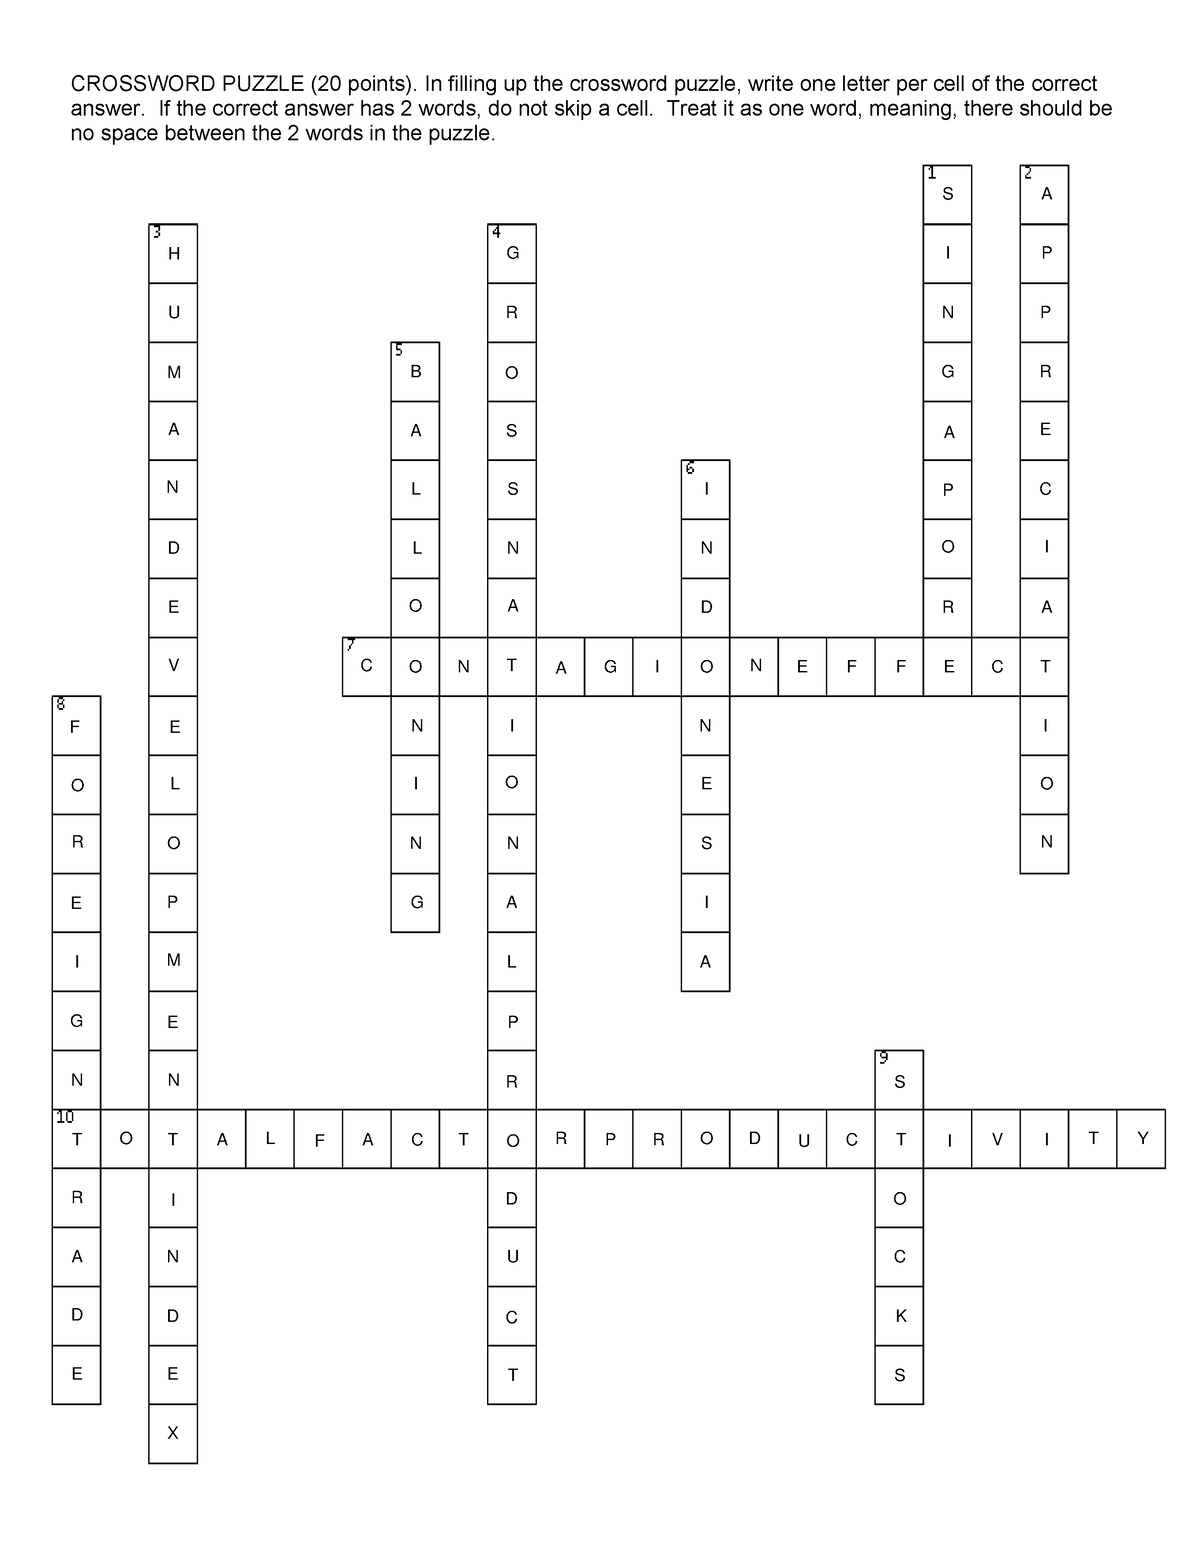 CRossword CROSS WRORD CROSSWORD PUZZLE (20 points) answer If the